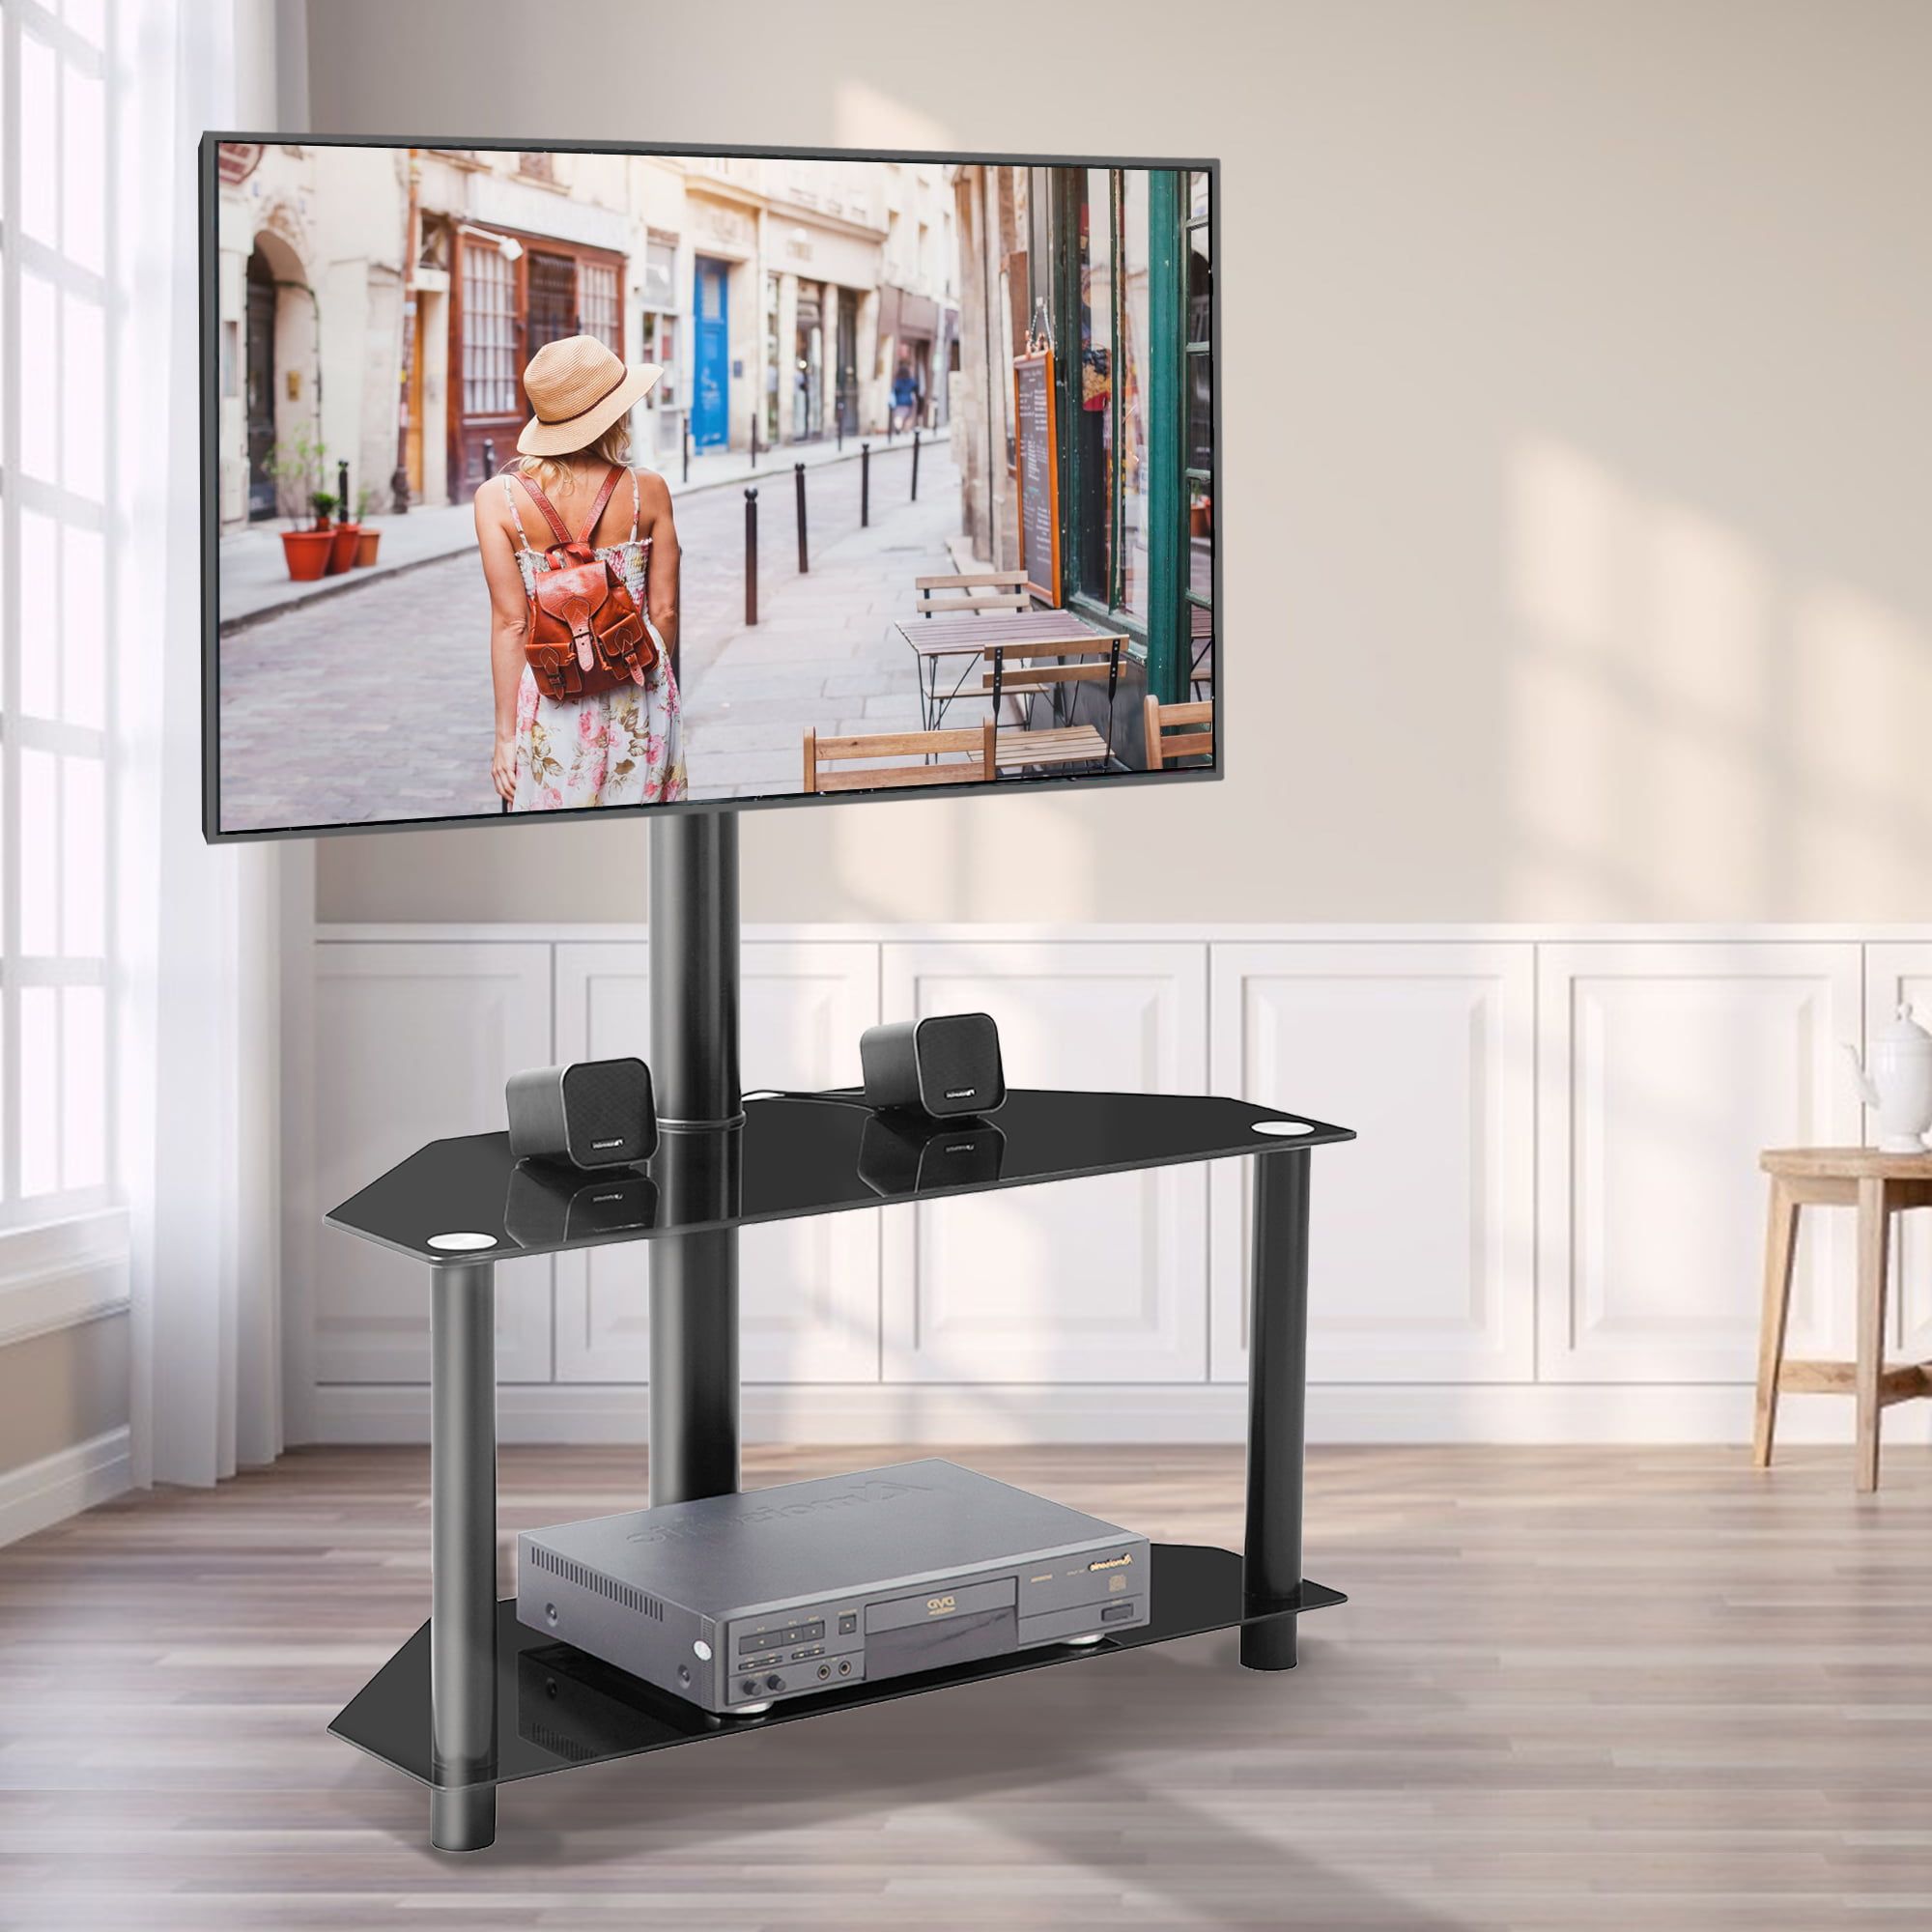 Universal Floor Tv Stand With Swivel Mount, Floor Tv Stand Height Inside Universal Floor Tv Stands (View 5 of 20)